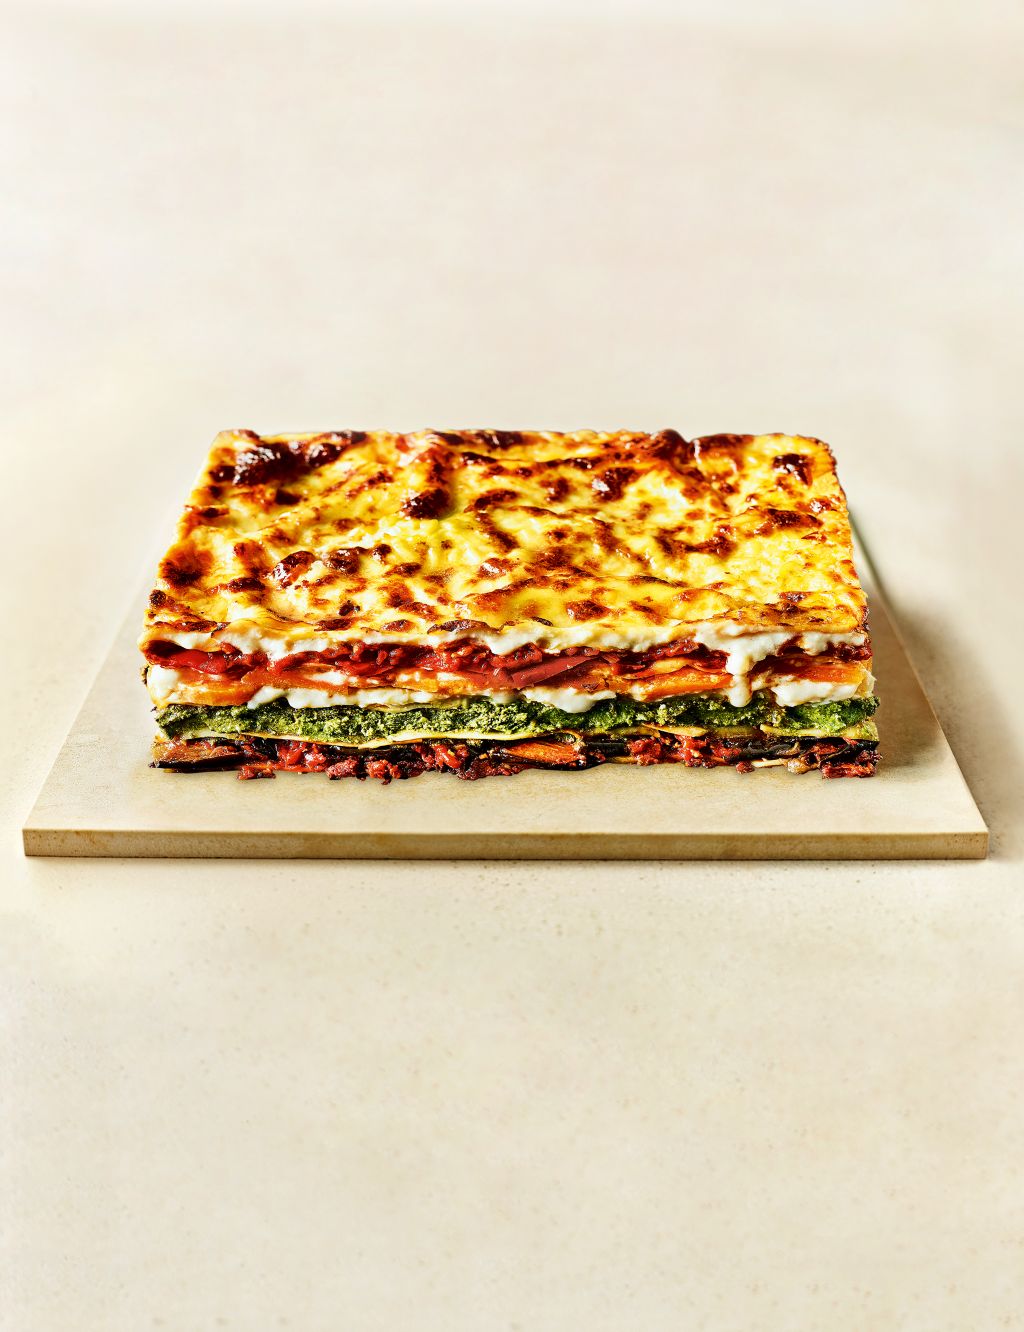 From The Deli Hand-Prepared Vegetable Lasagne (Serves 6) 1 of 4